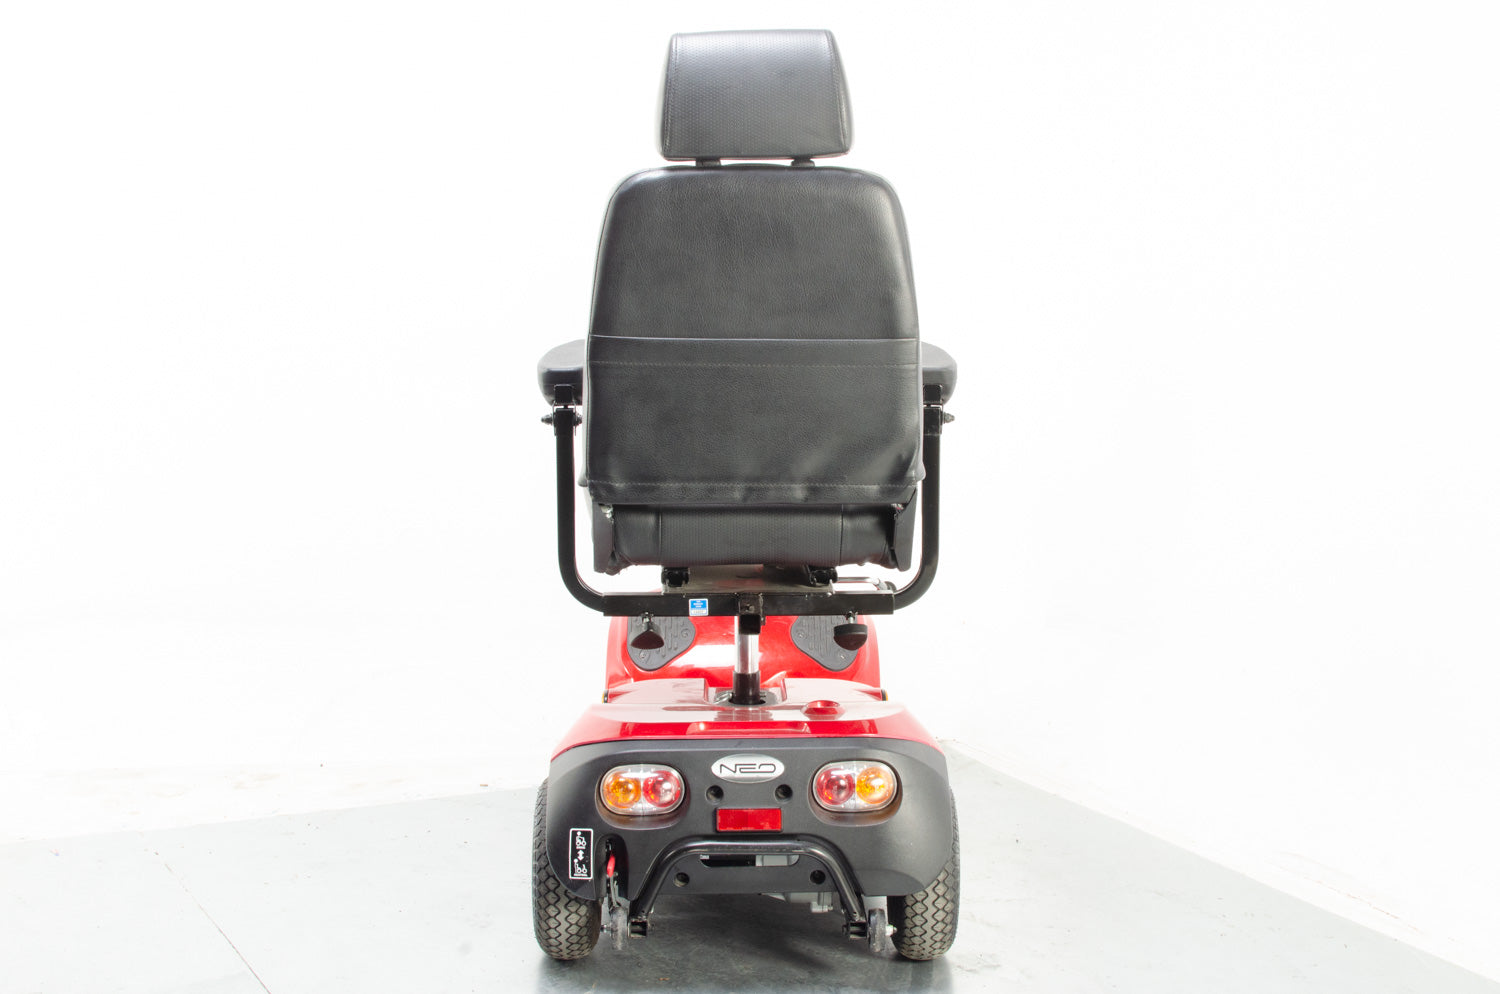 2018 Drive Neo 6 6mph Mid Size Mobility Scooter in Red